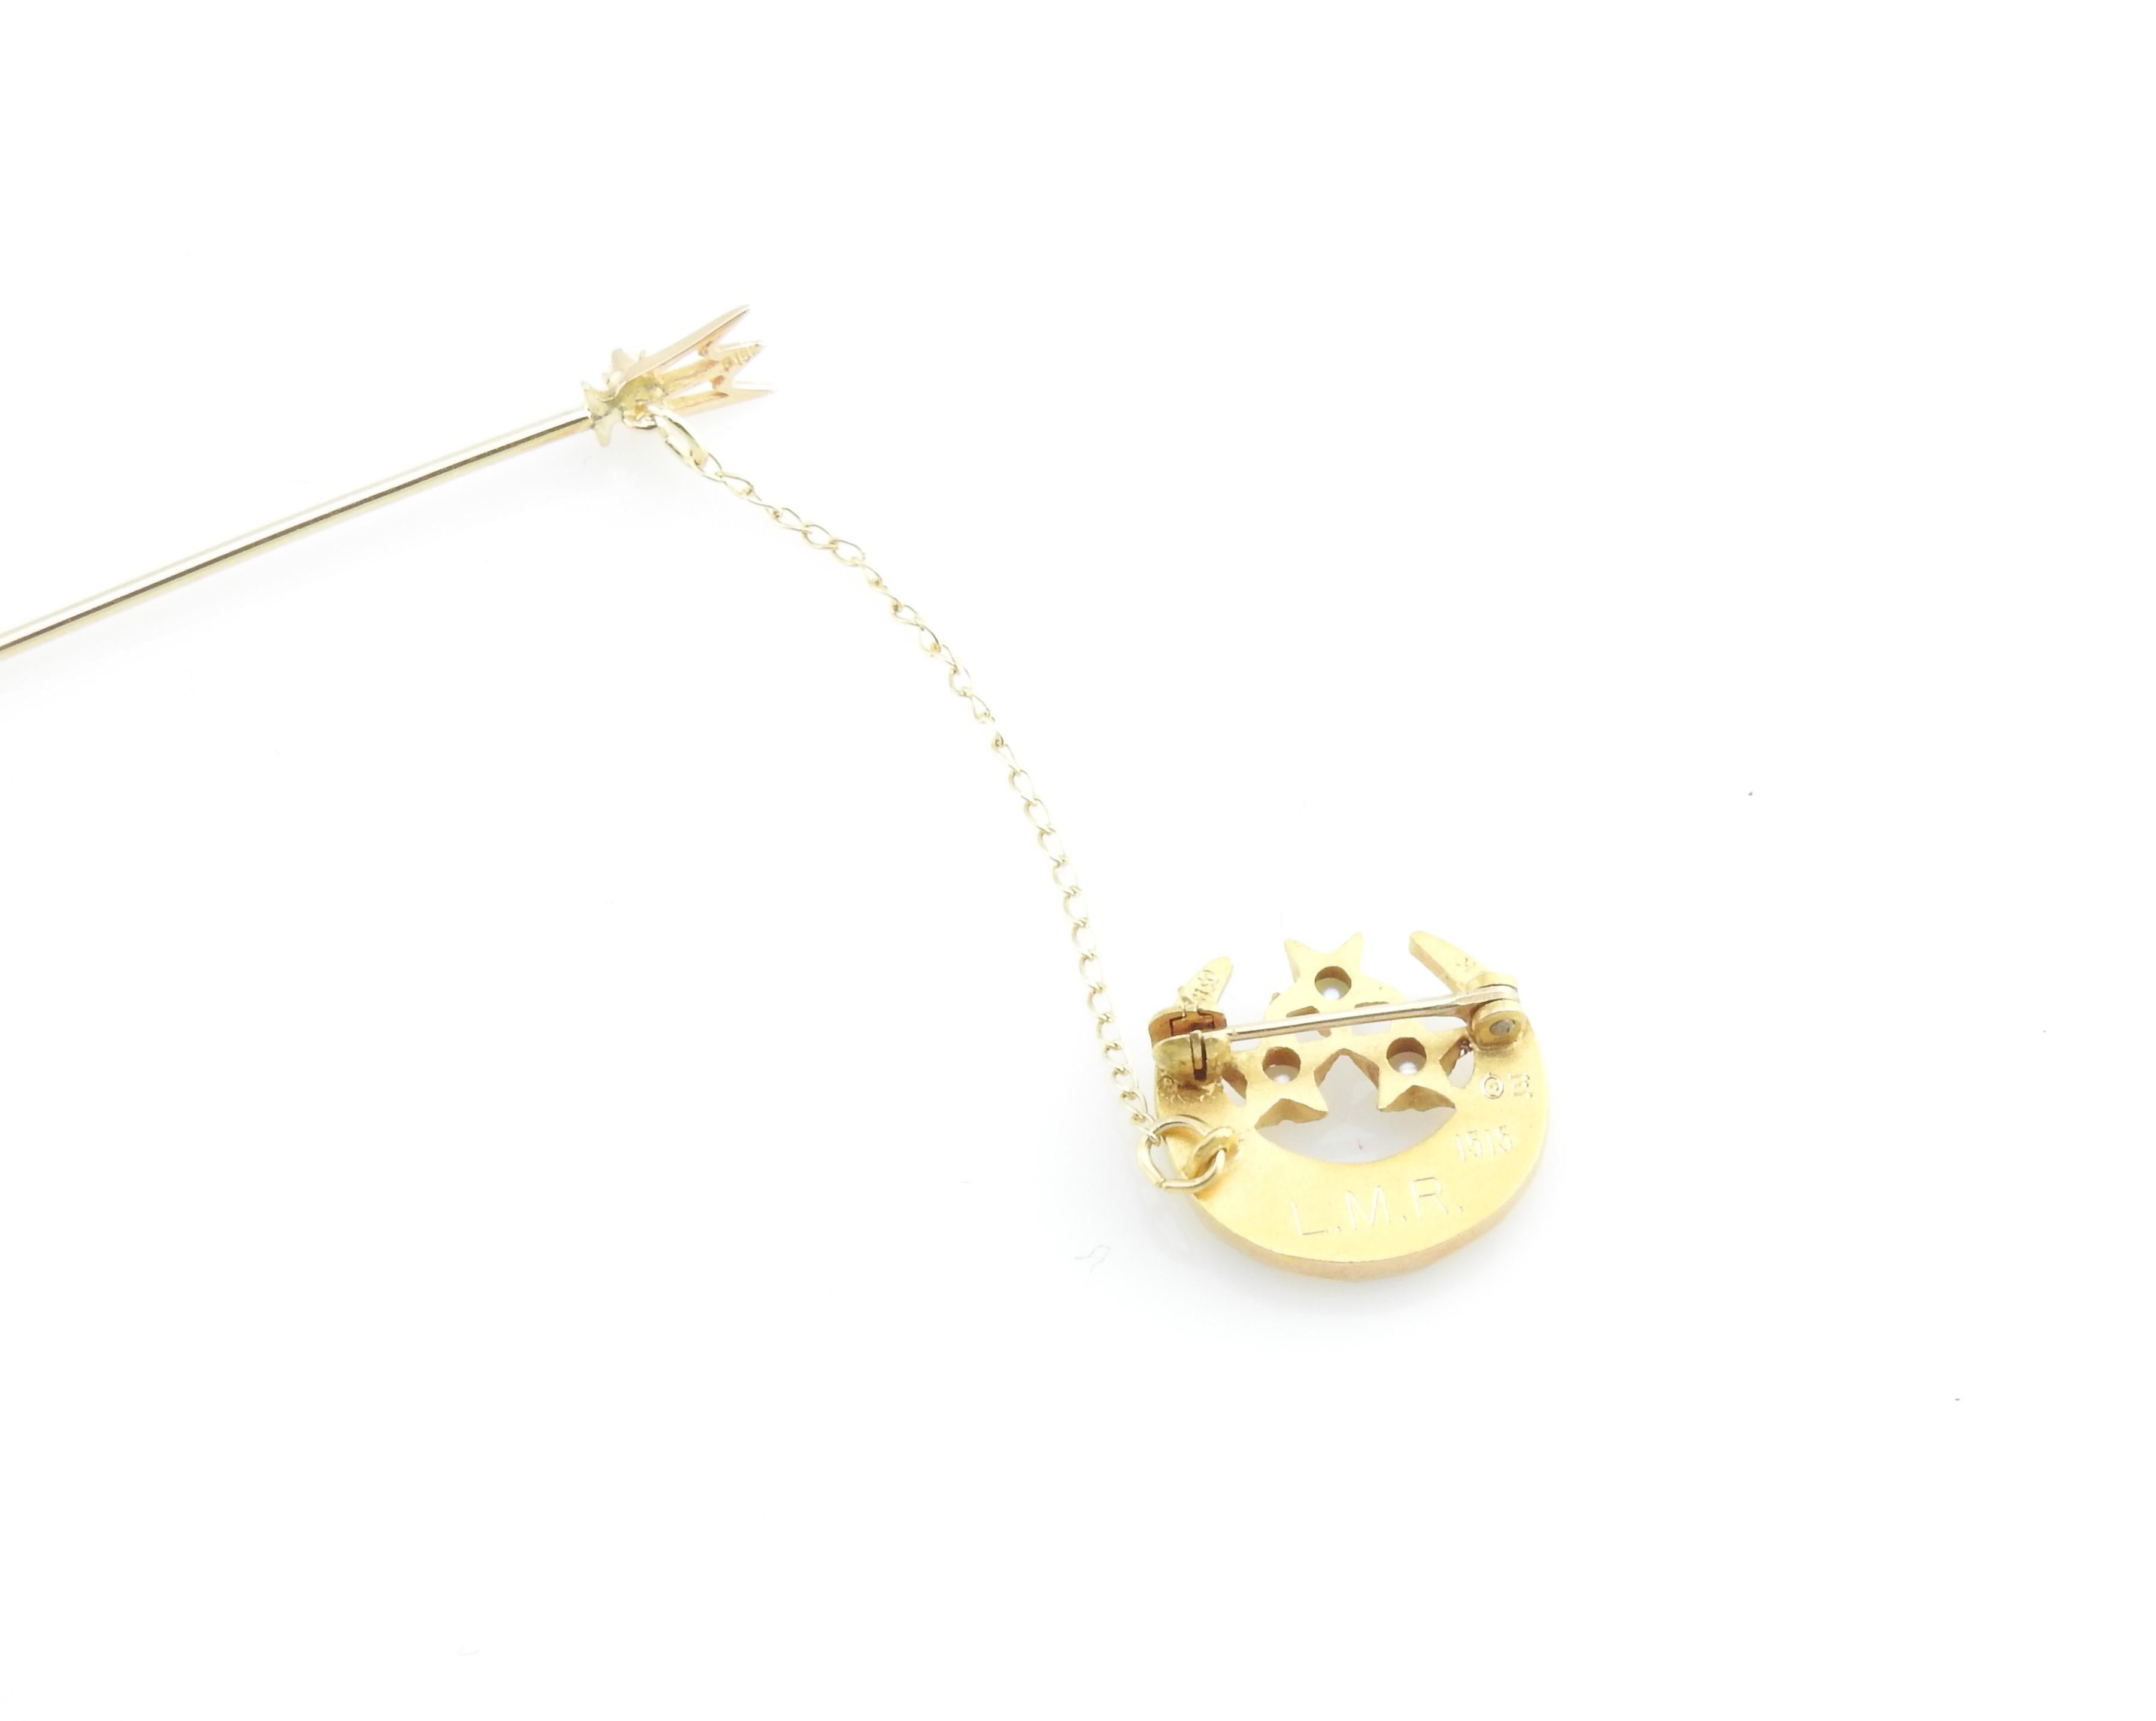 Women's 10 Karat Yellow Gold and Seed Pearl Crescent Moon Stick Pin